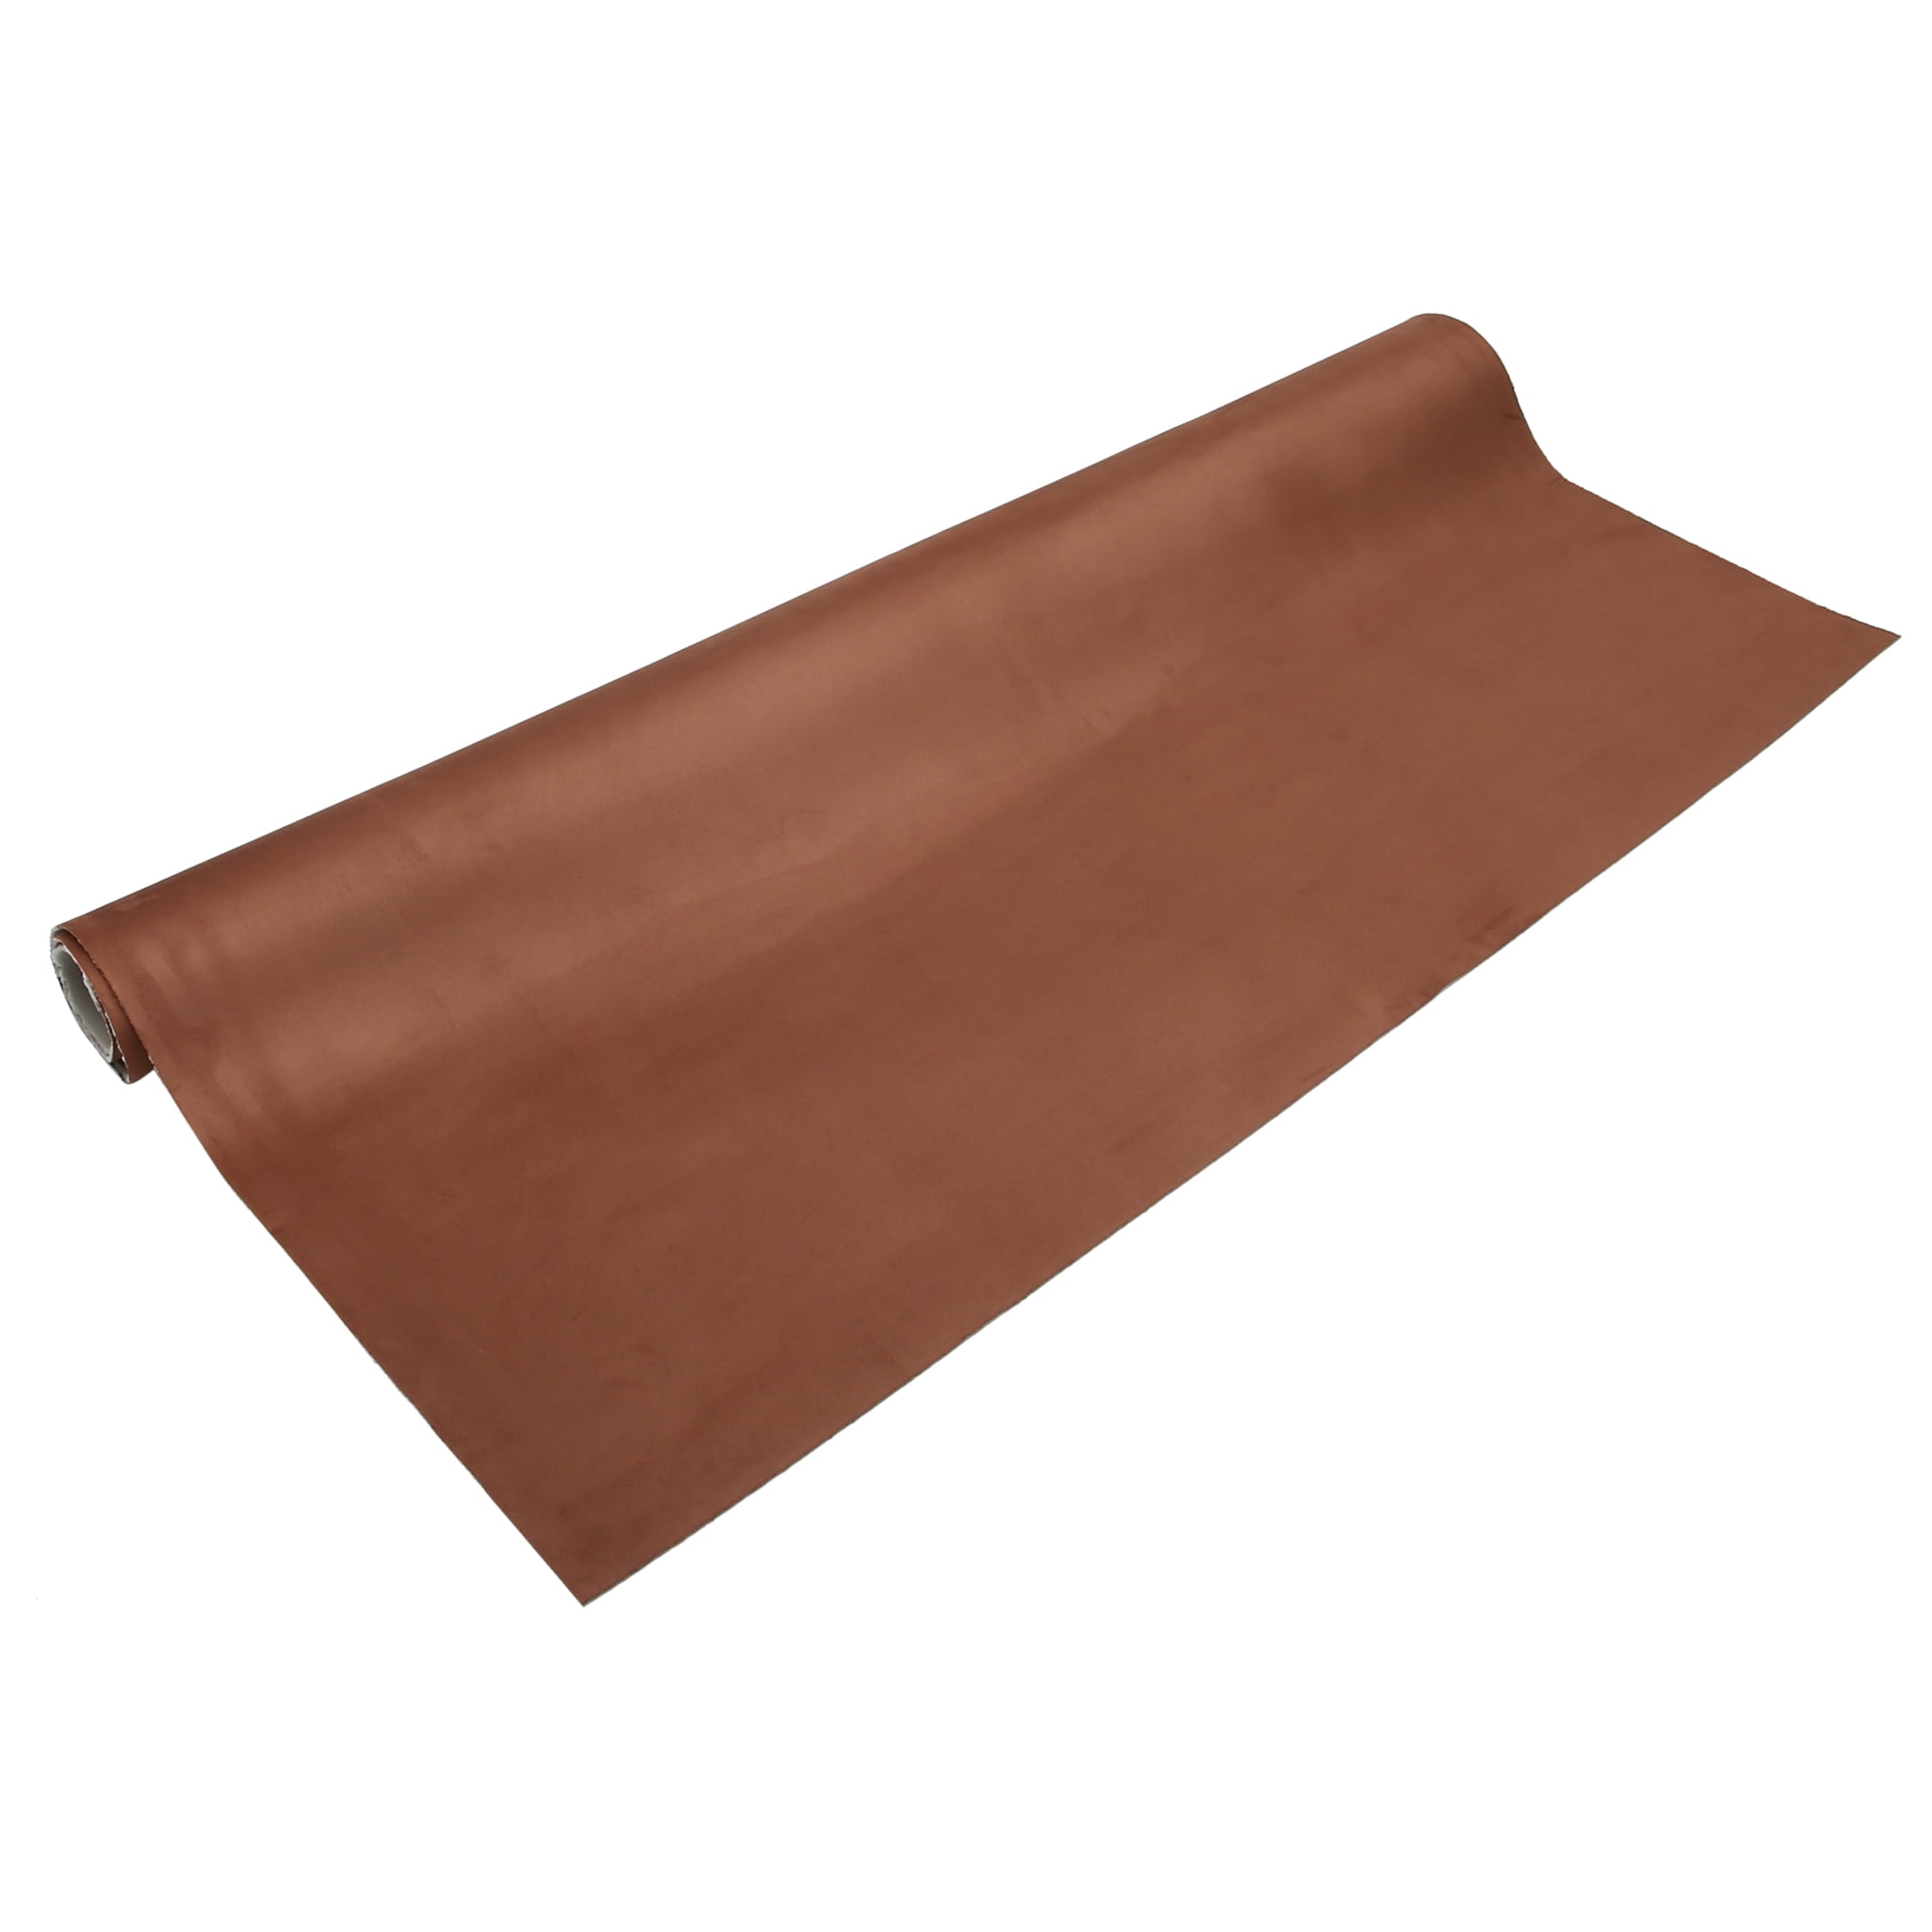 Vinyl Synthetic Leather Fabric Marine Waterproof Material 36 L×55 W 0.6mm  Thick Soft Upholstery Leather Sheets for Car Headliner Furniture Sofa Boat